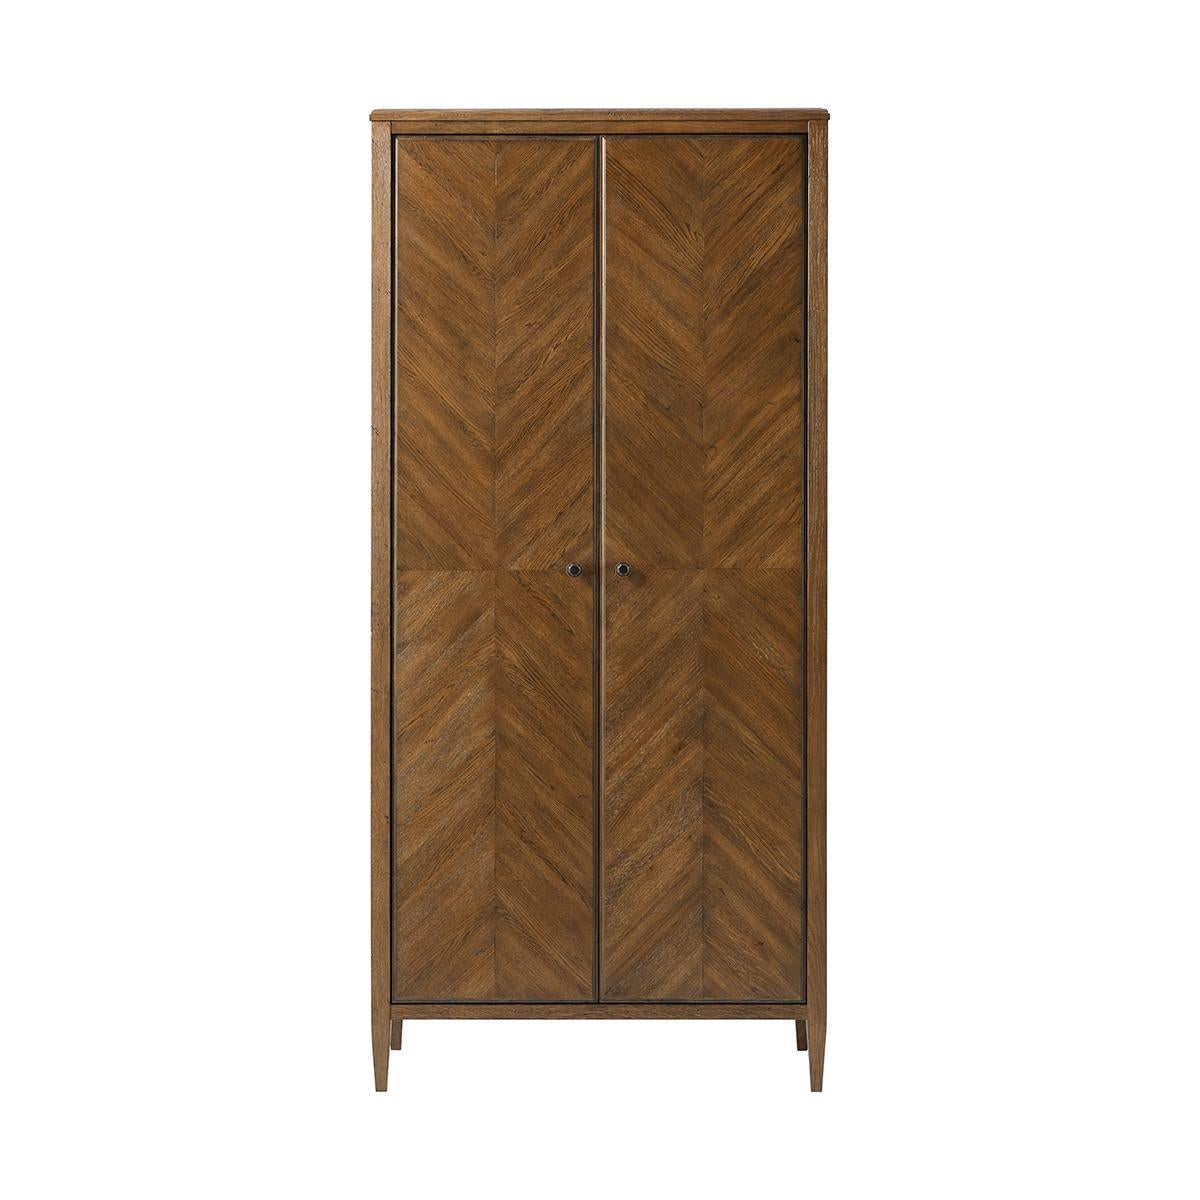 A modern rustic-style oak two-door cabinet with mirrored herringbone parquetry doors. It is adorned with elegant Verde Bronze knobs and rests upon tapered legs. 

Dimensions: 38